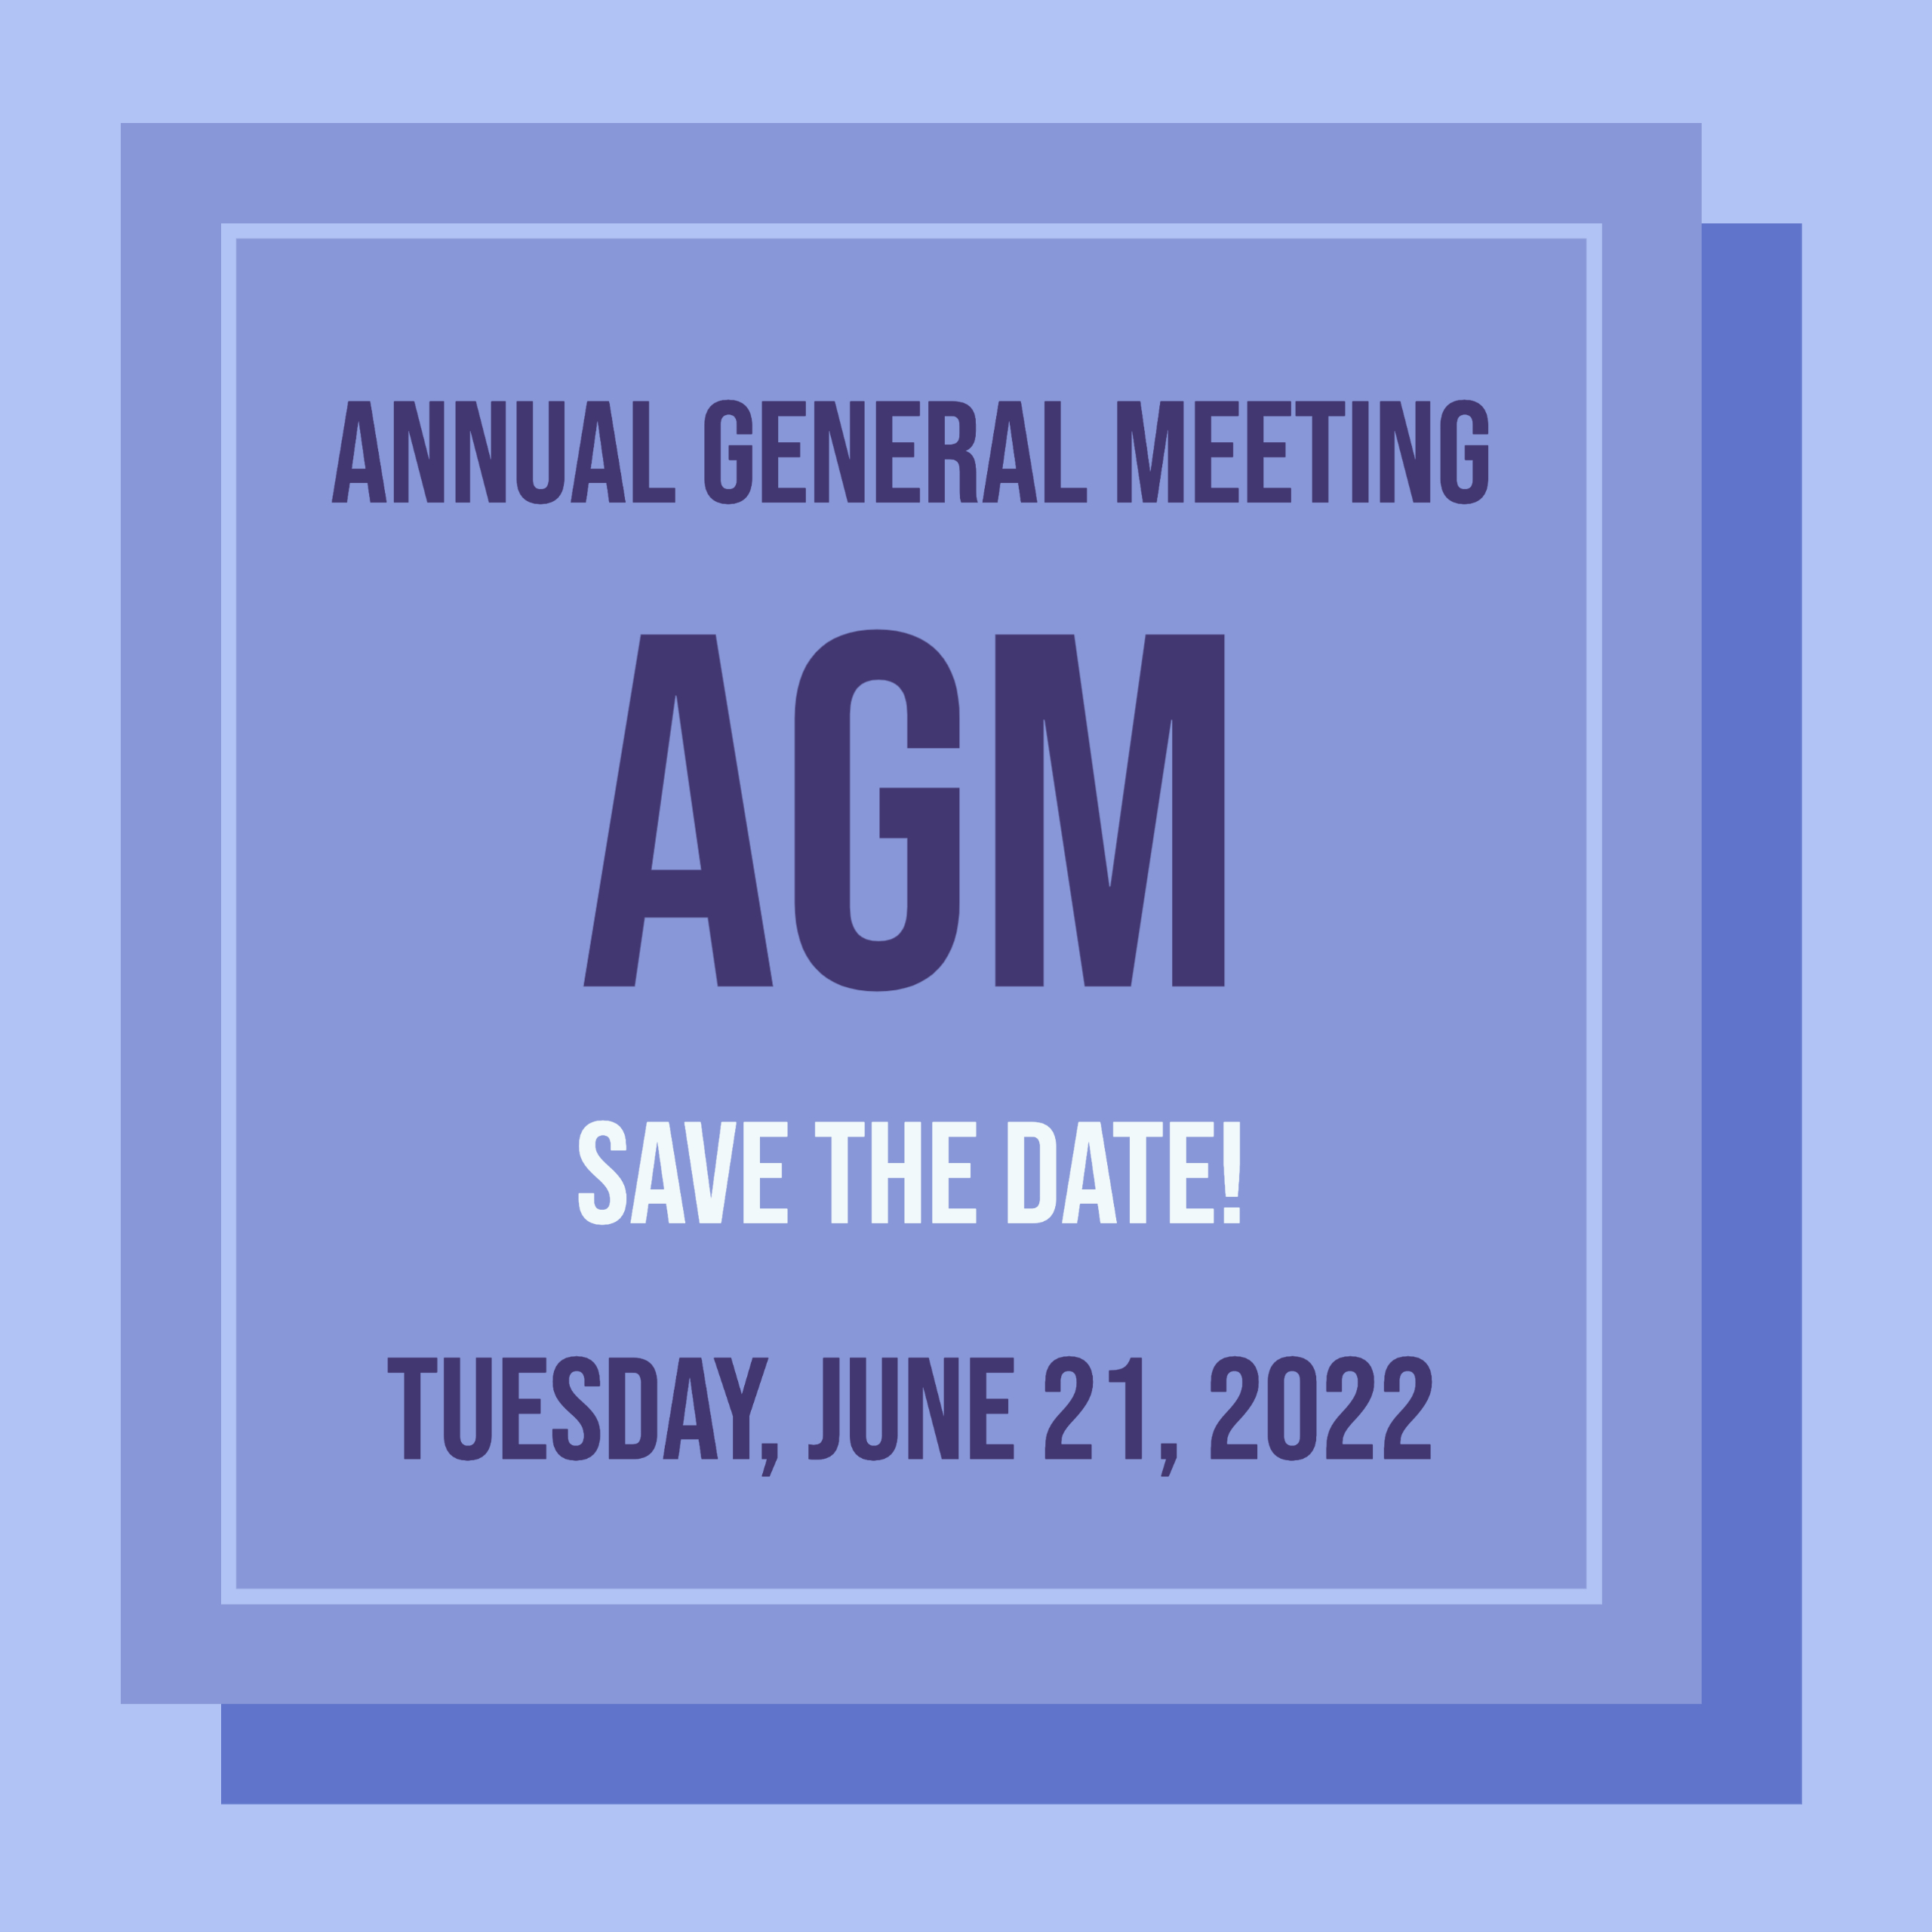 AGM 2022 – Save the Date!